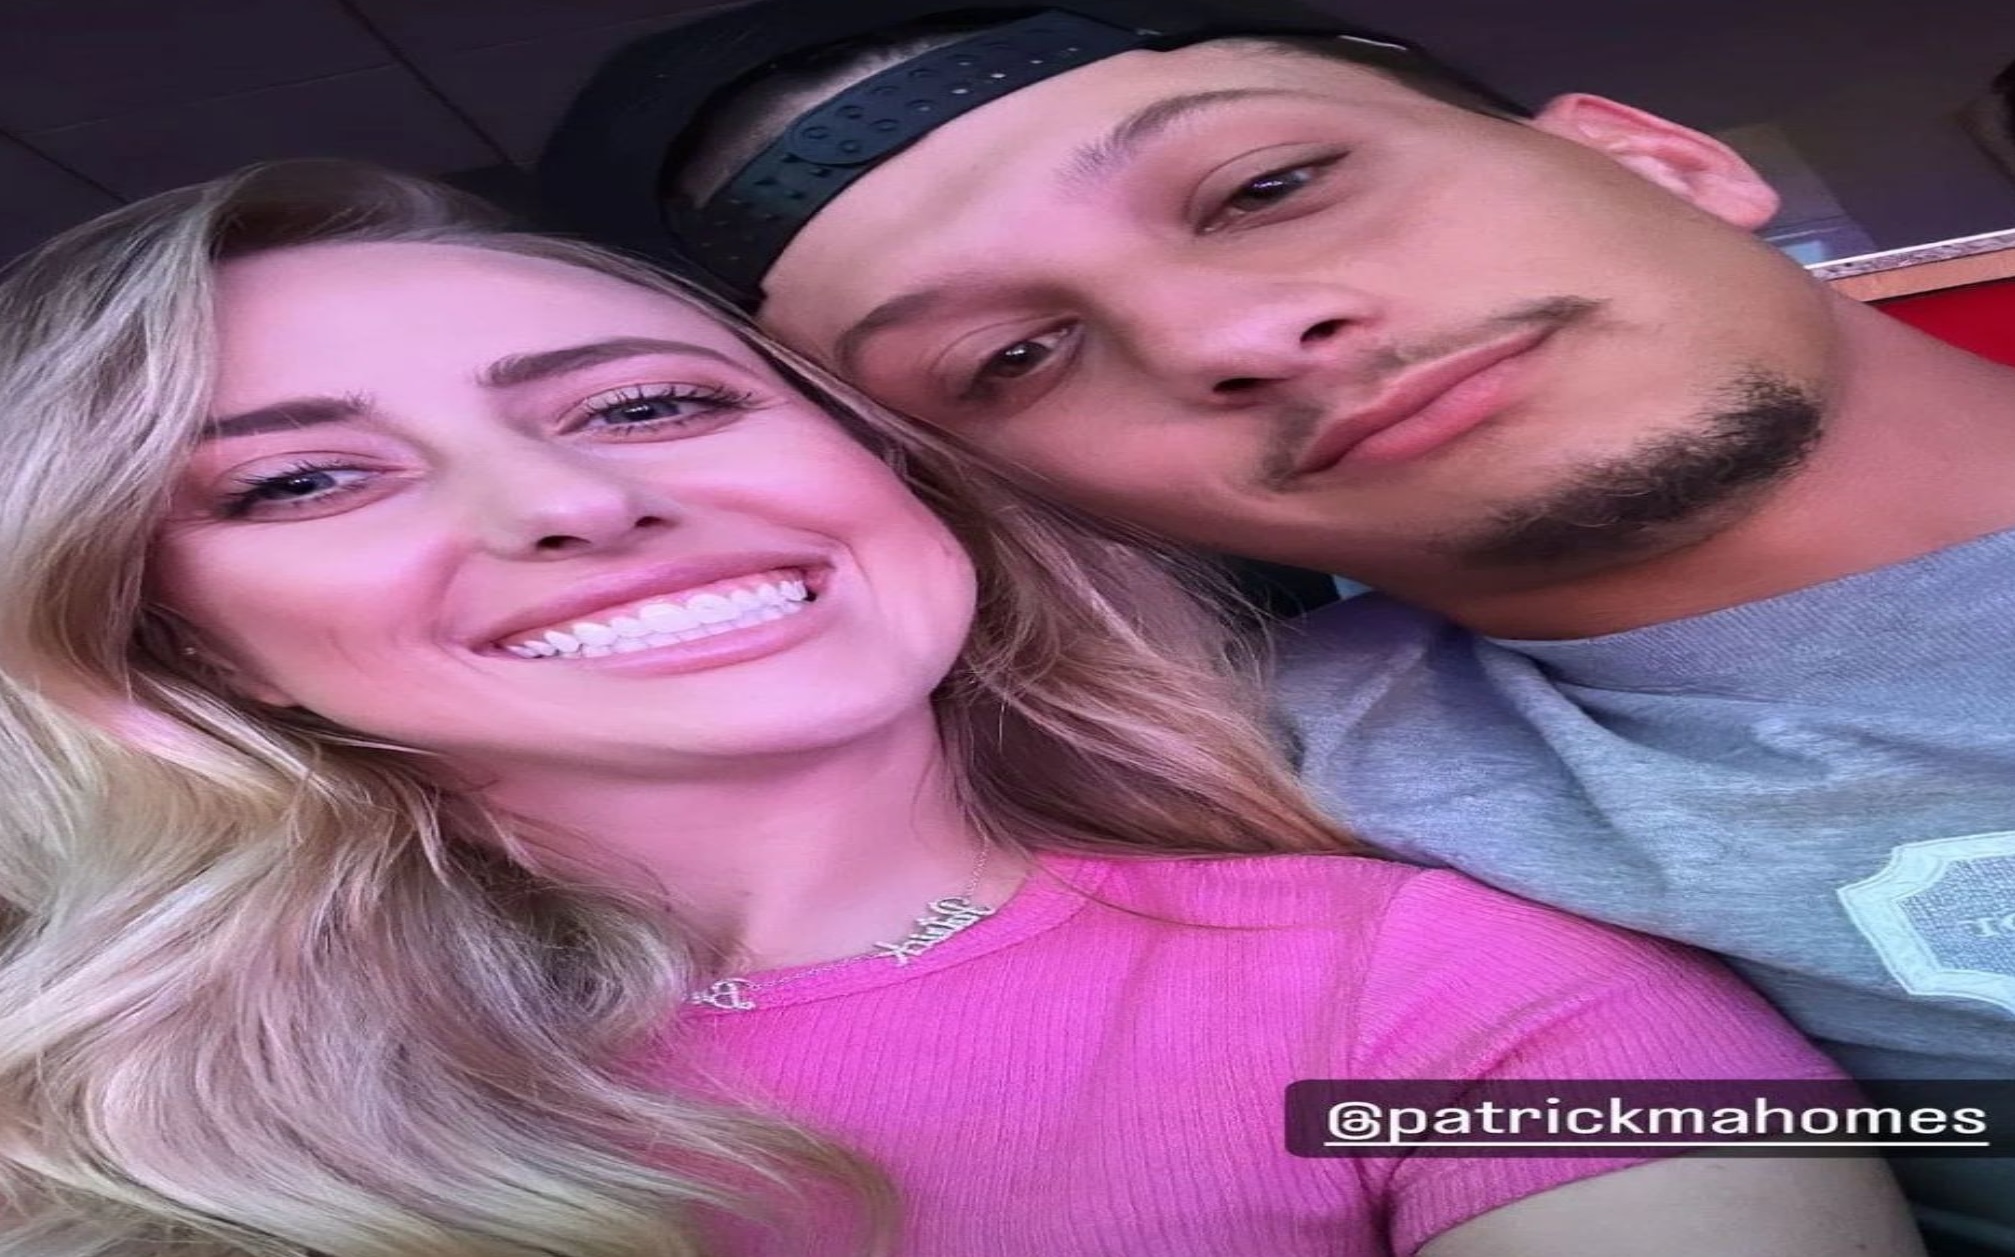 "Leave my wife alone! She is perfect to me," Patrick Mahomes issues a stern warning to critics who targeted his wife, Brittany, for her fashion choices online.